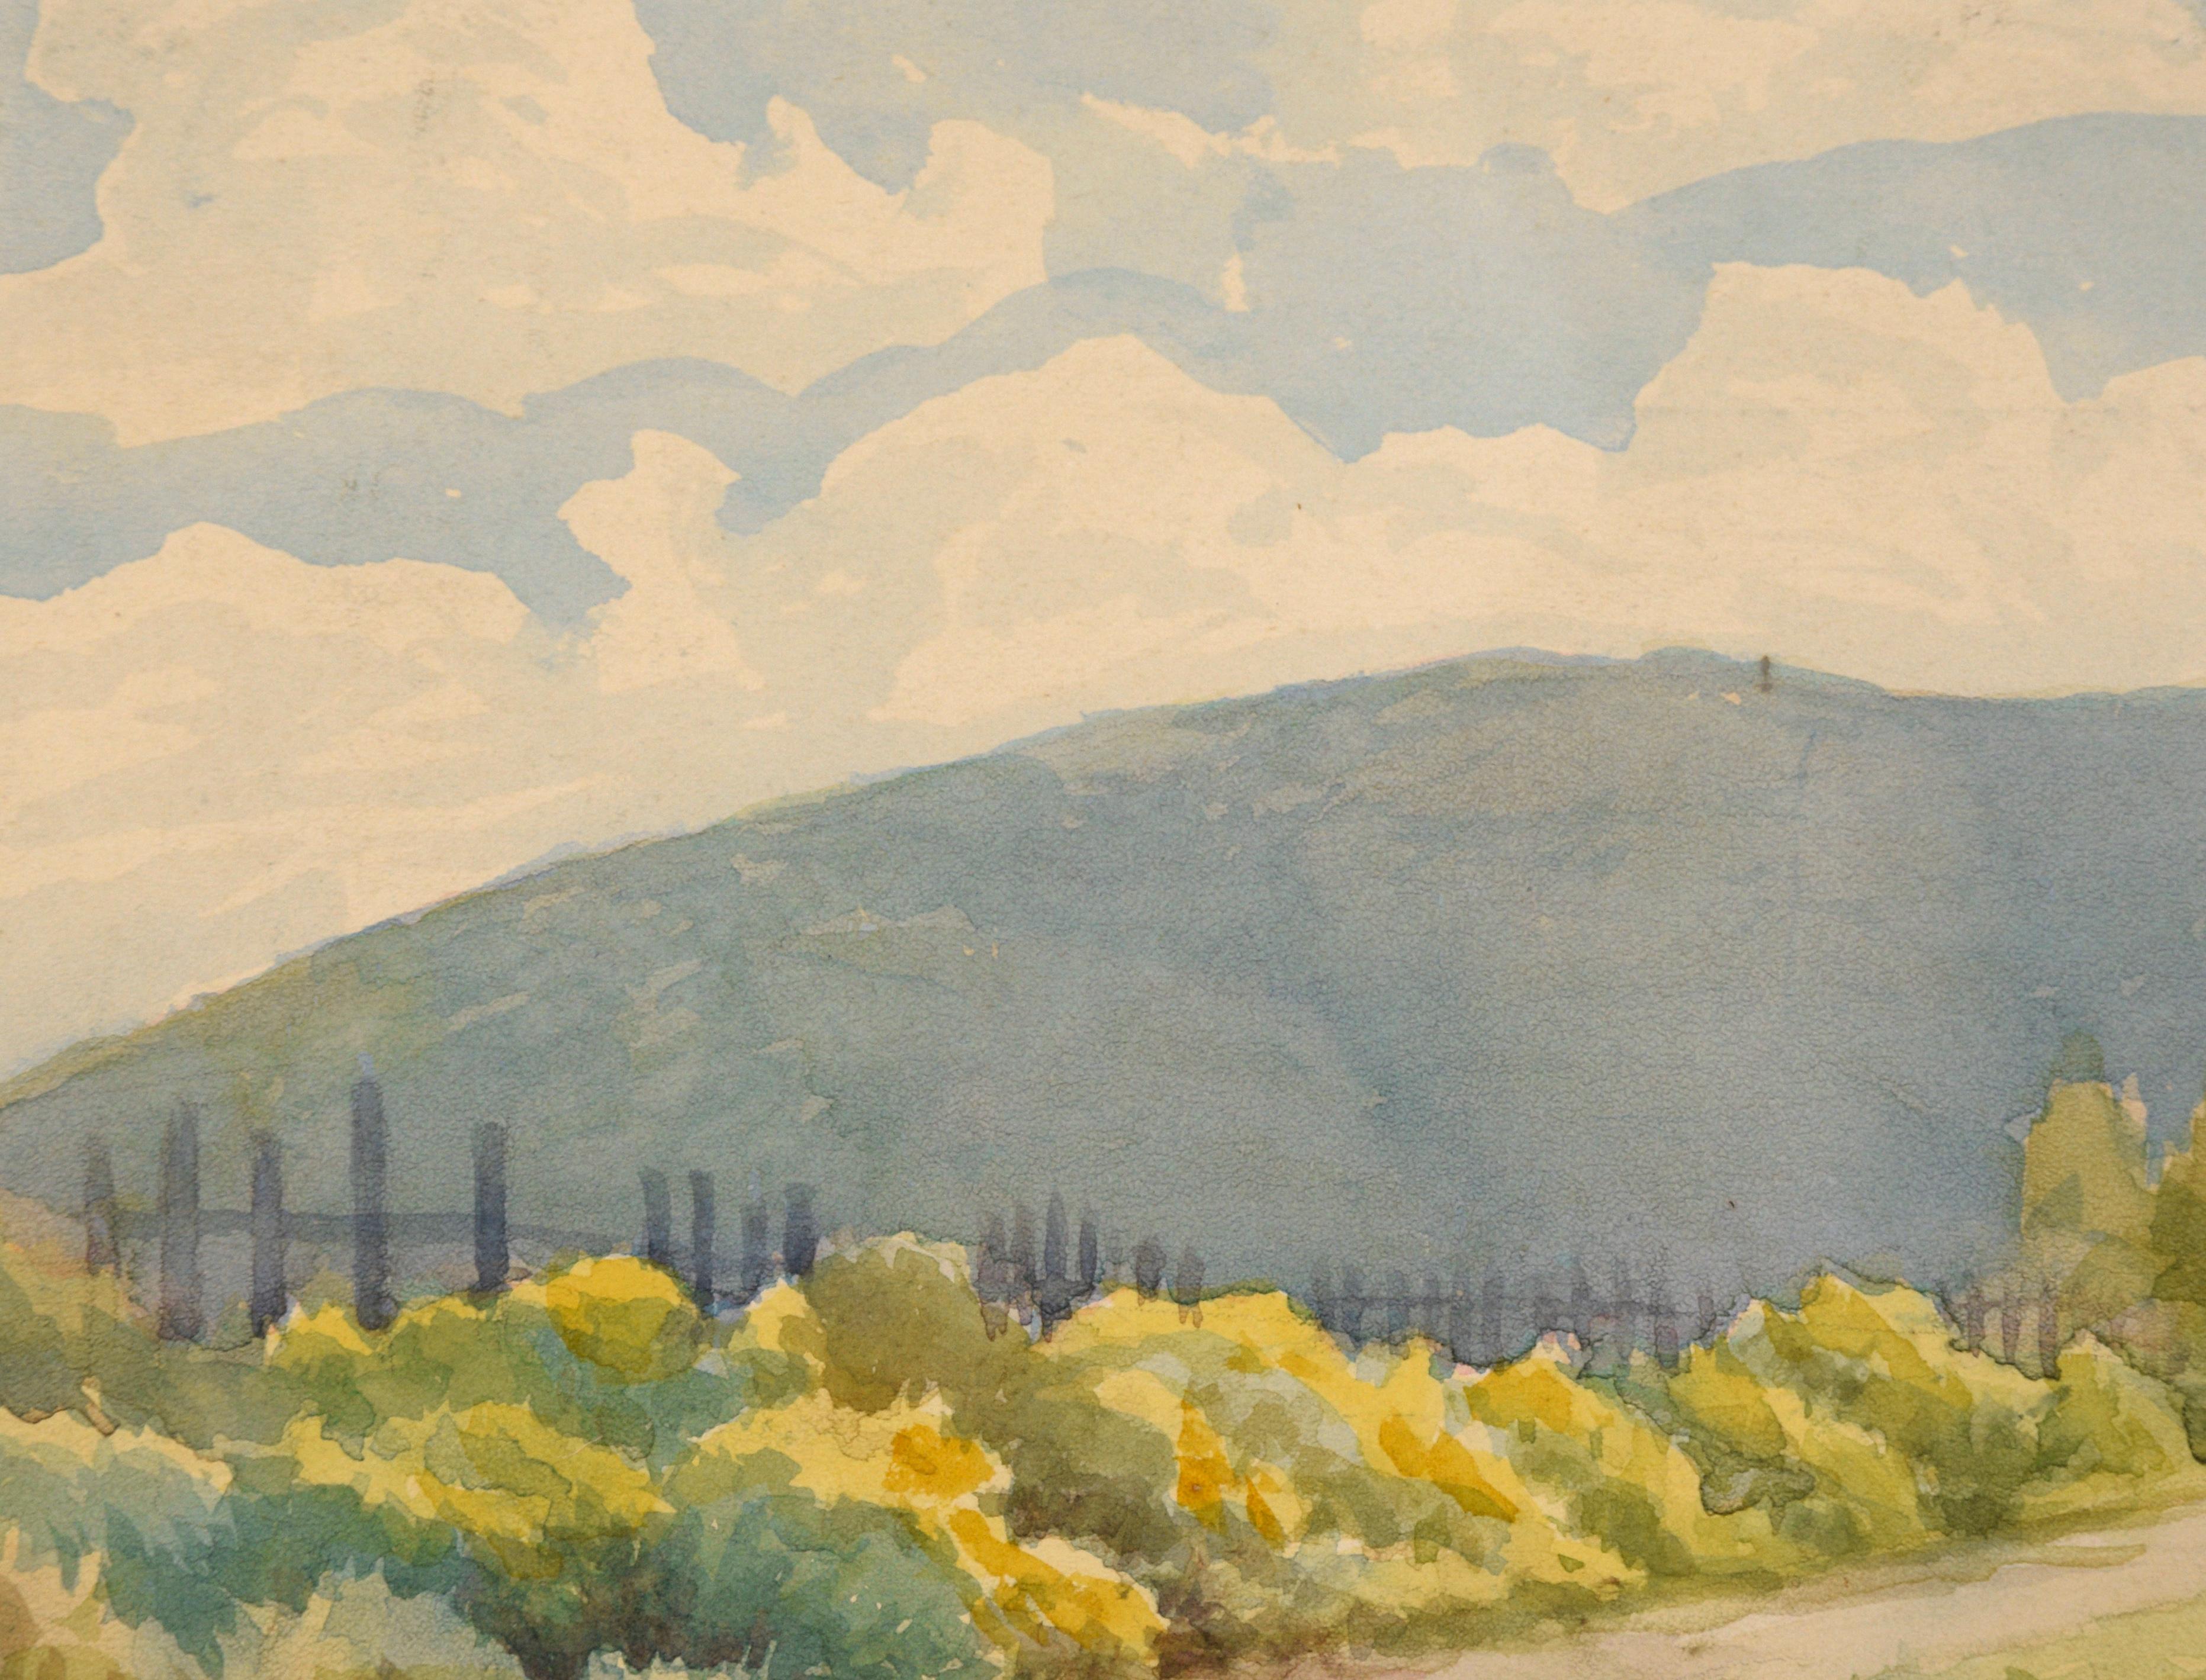 California Hills, Mid Century Landscape Watercolor  - American Impressionist Art by Unknown